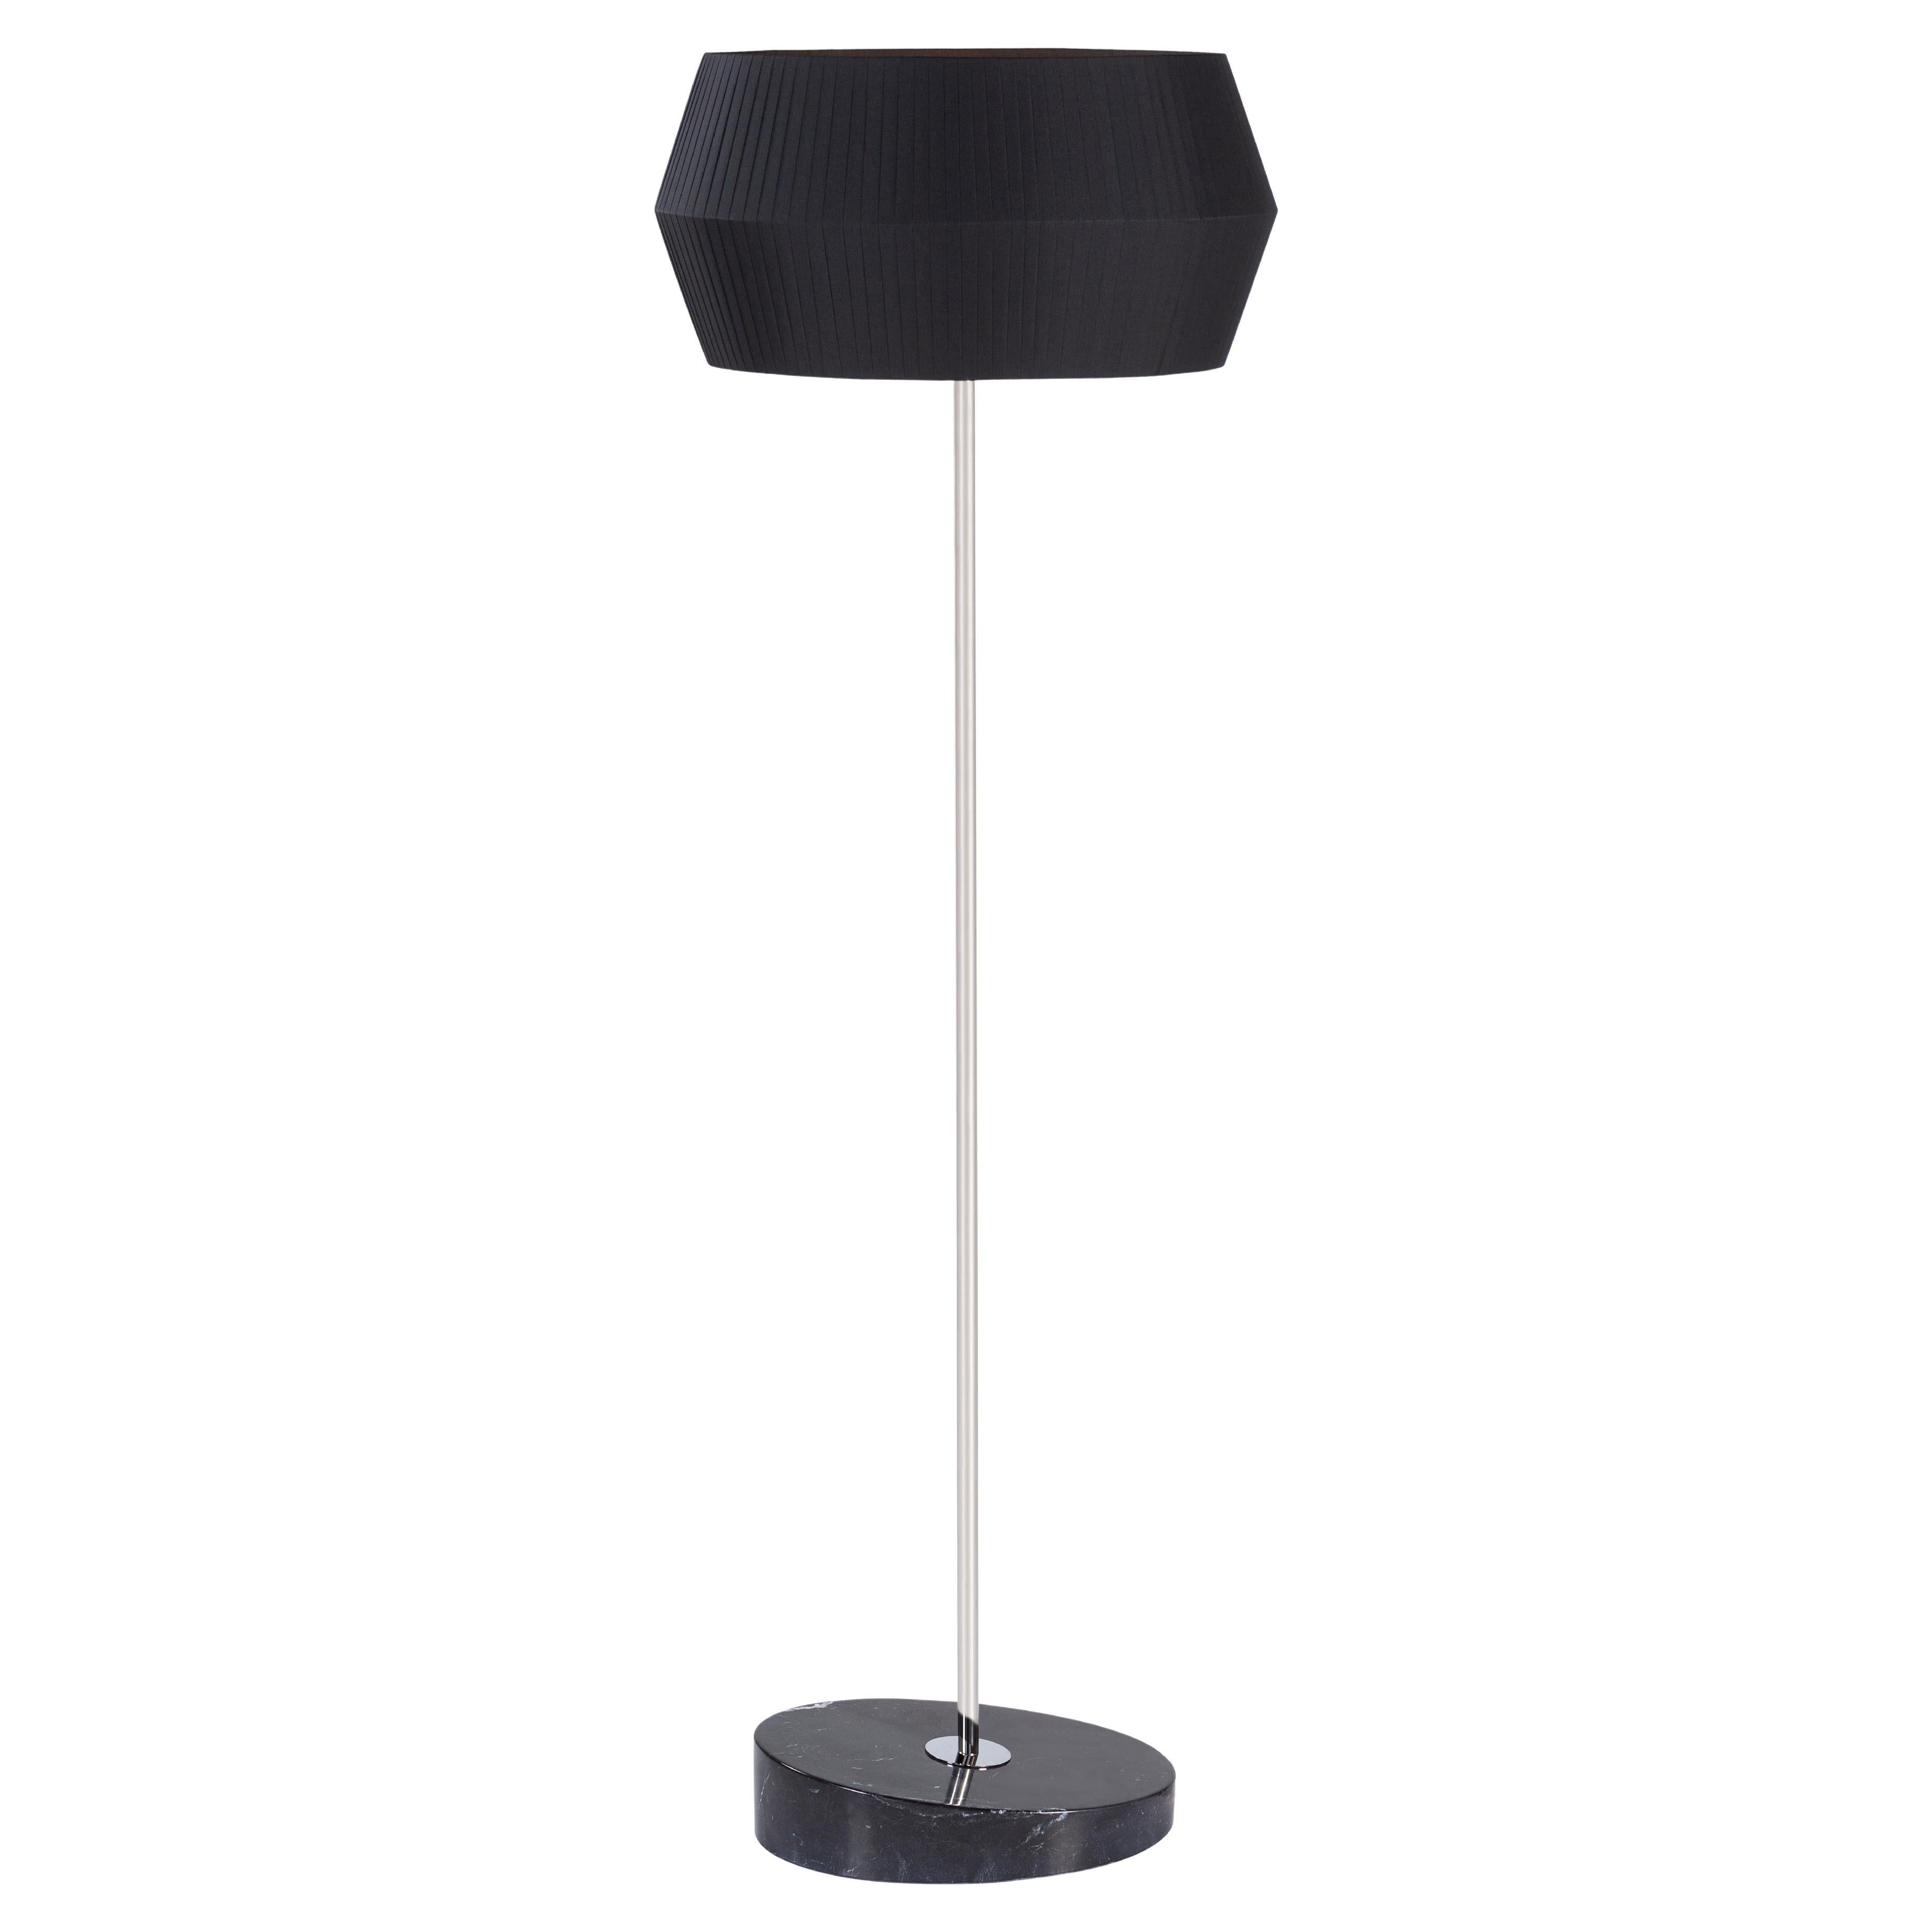 21st Century Modern Sublime Floor Lamp Handcrafted in Portugal by Greenapple